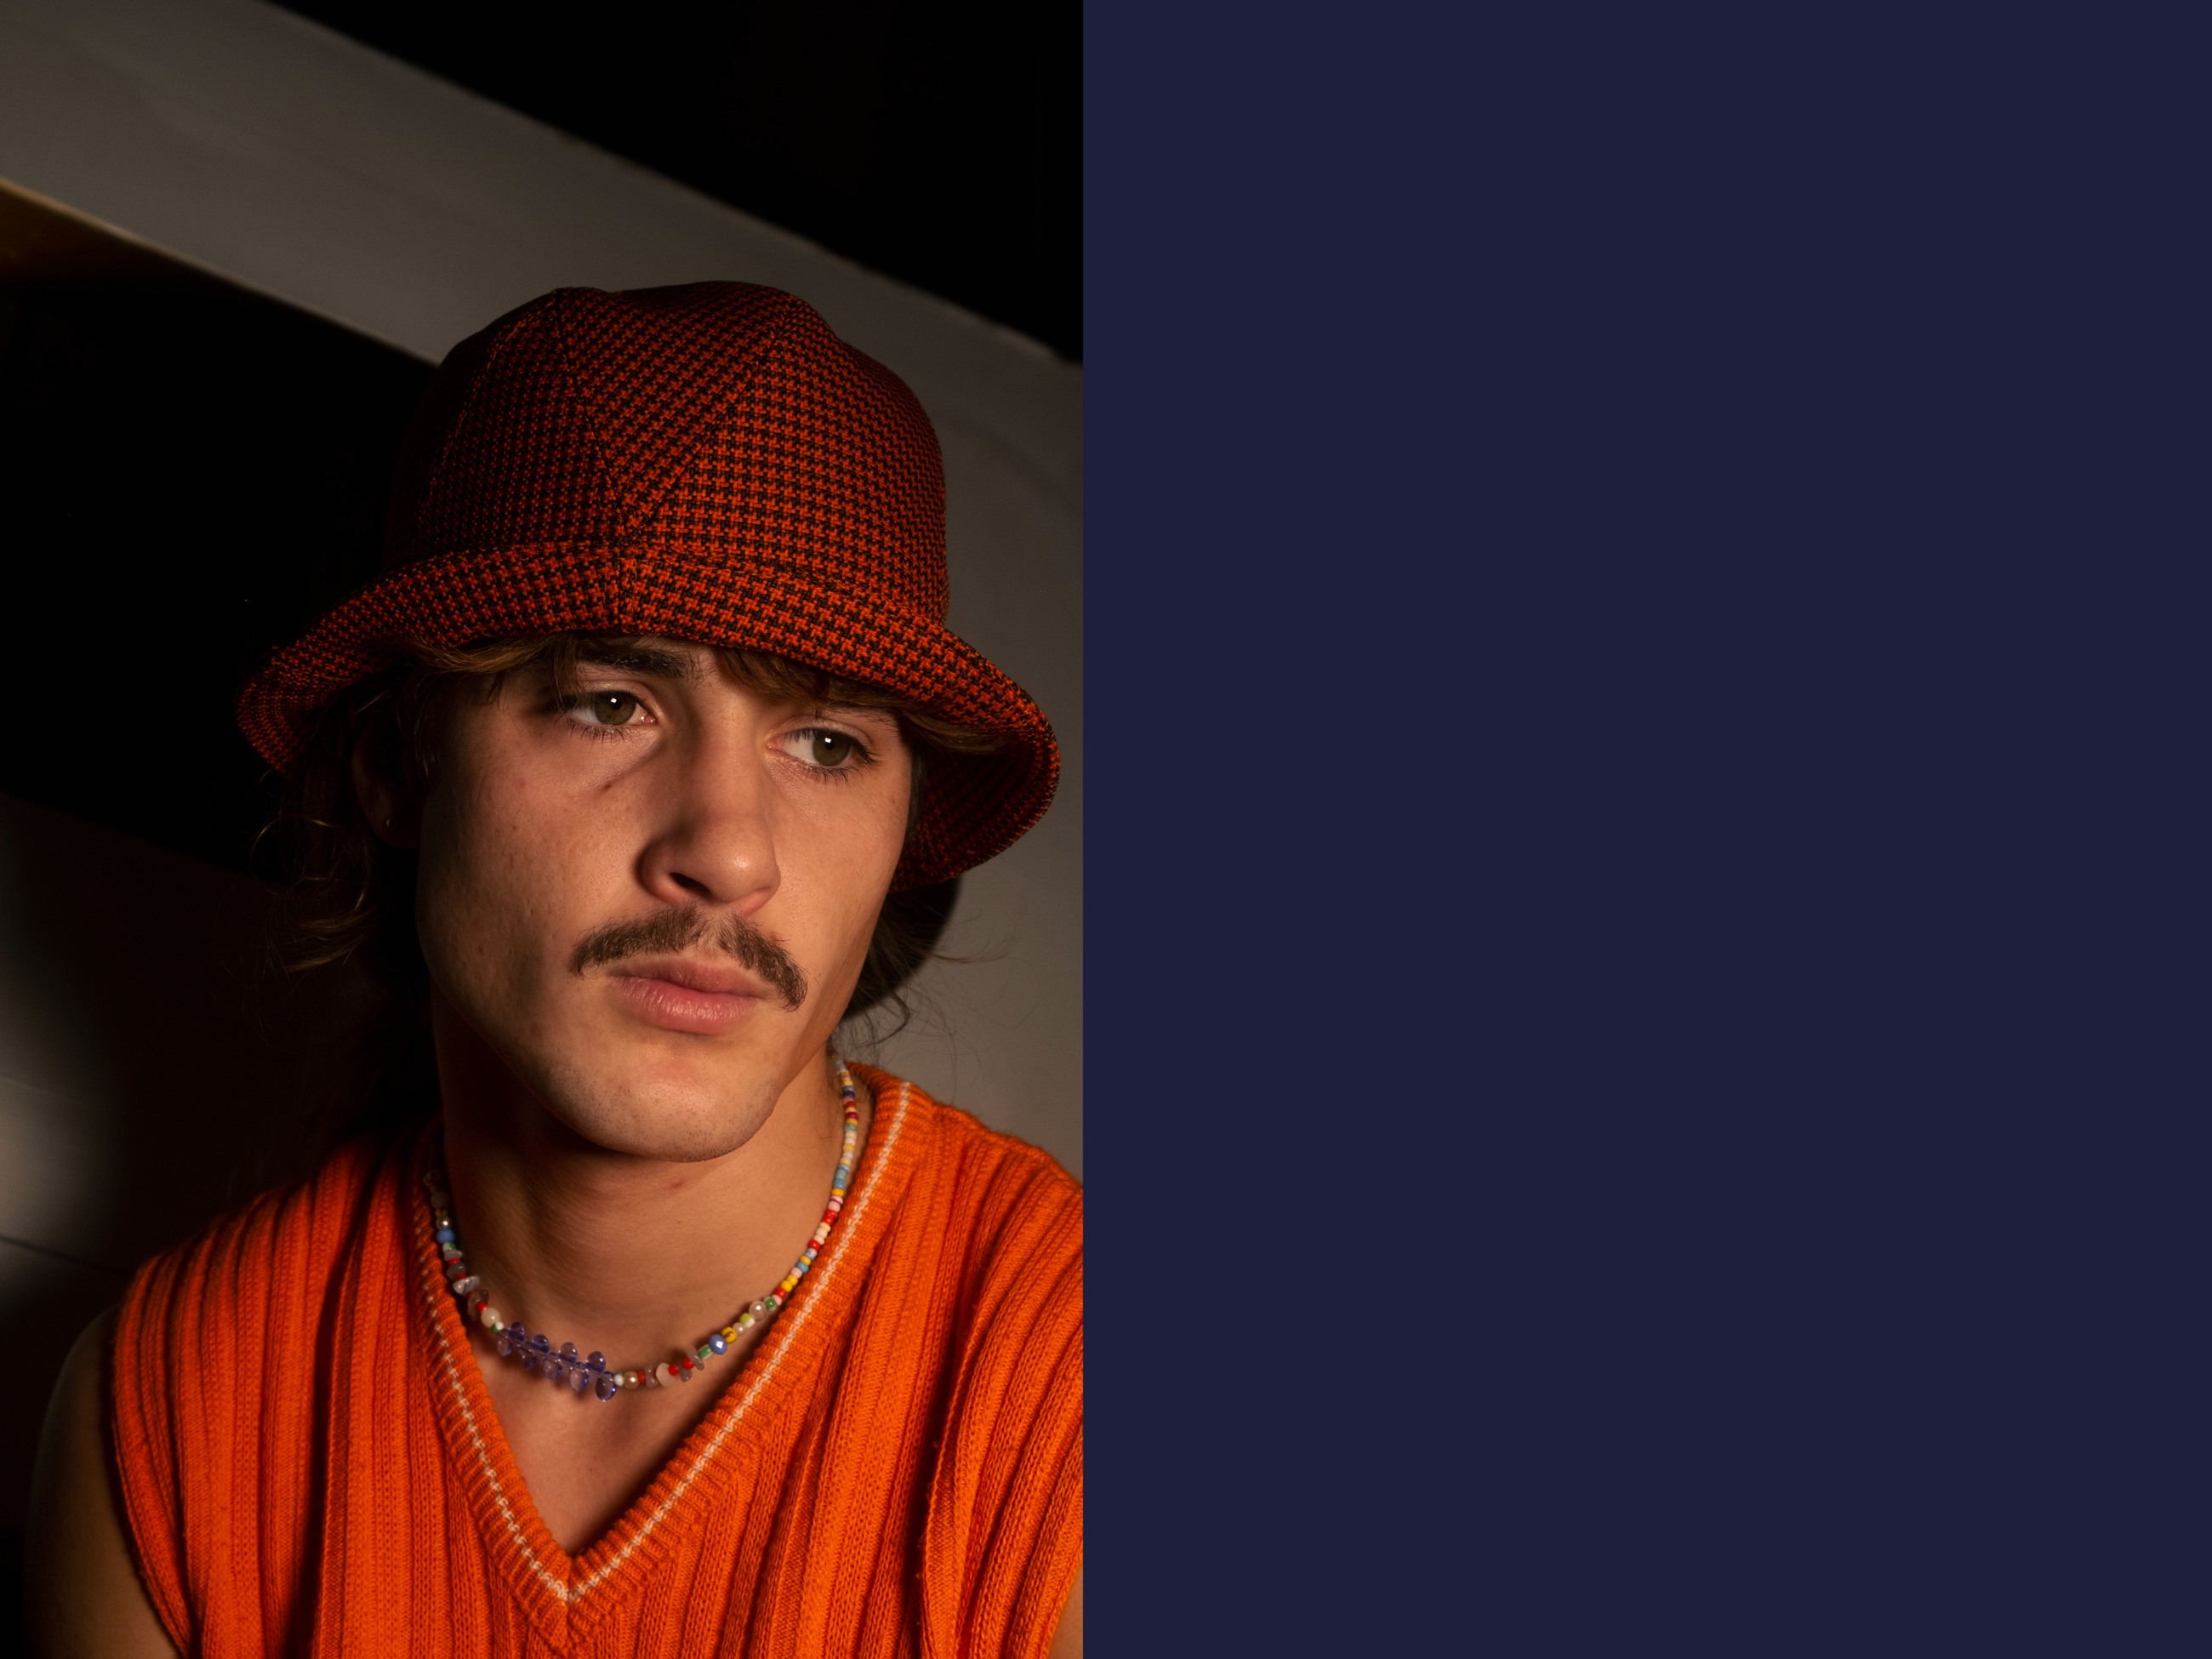 Paul is wearing a Le Panache Paris© bucket hat made in France with Go Couture_63080, Gabriel© brand fabric, 100% Trevira cs, brown houndstooth pattern on a orange background.